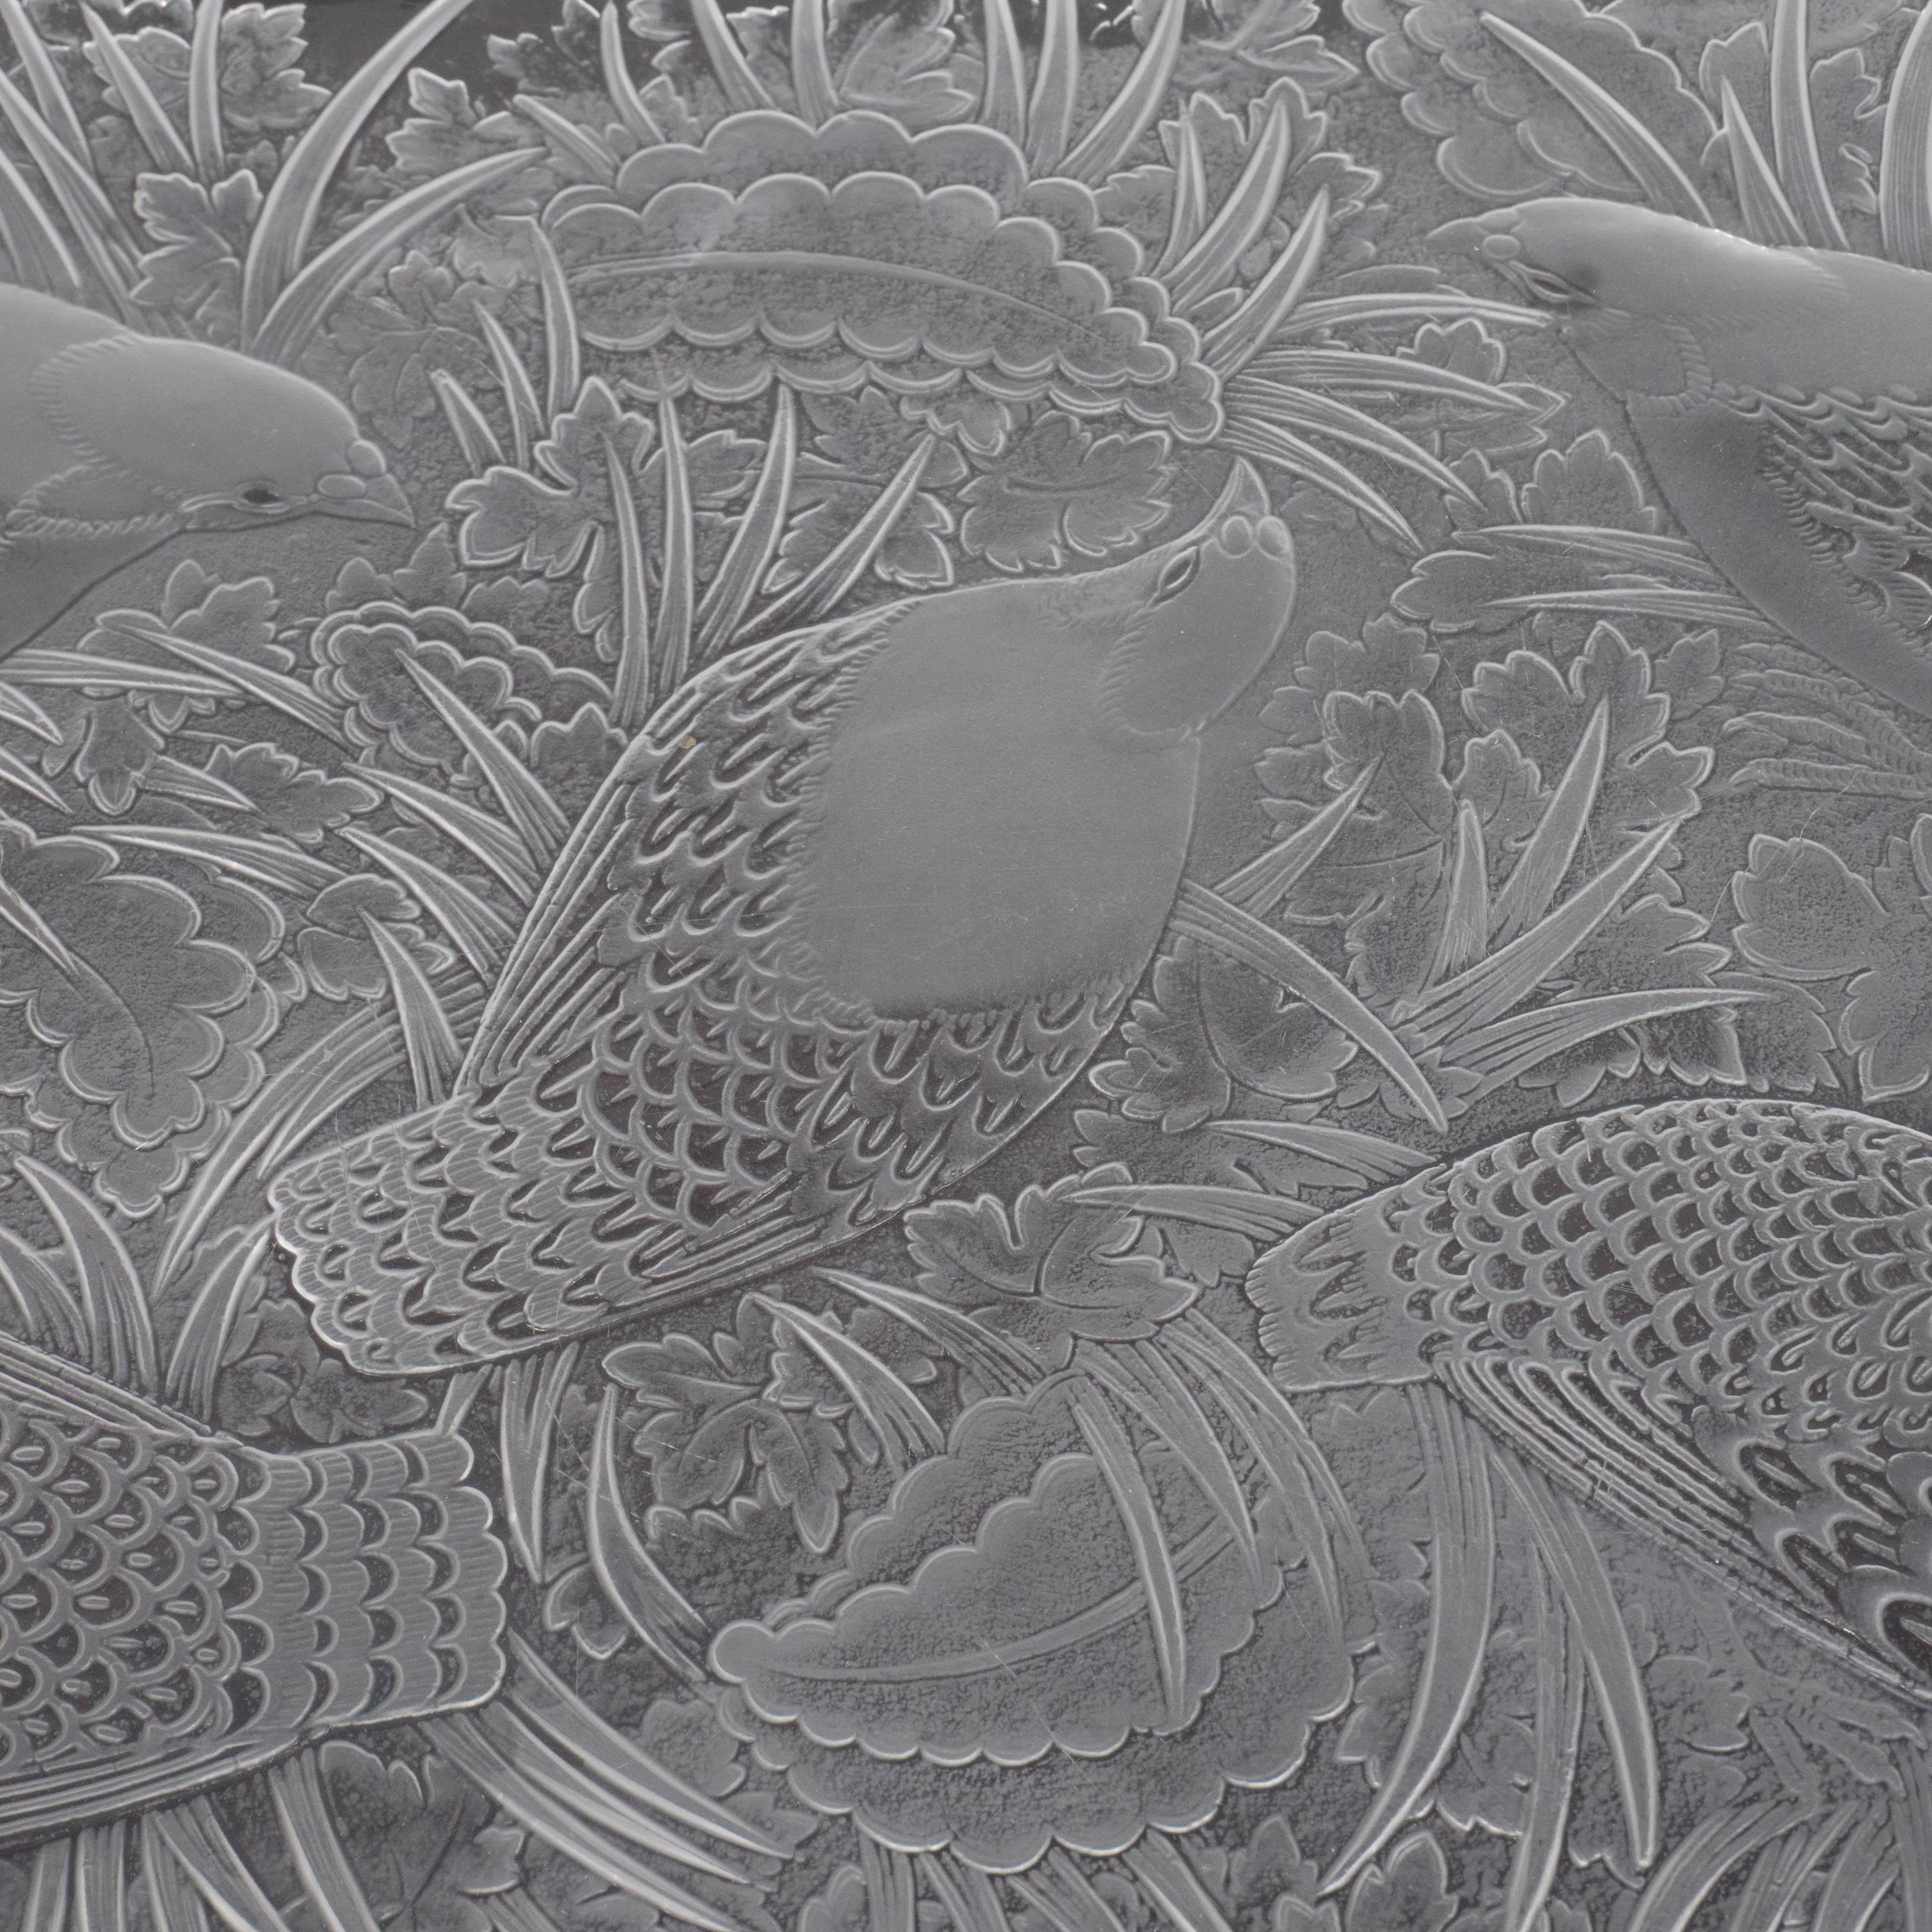 20th Century Lalique Art Deco Crystal Tray with Birds and Foliate Motifs in Perdrix Pattern